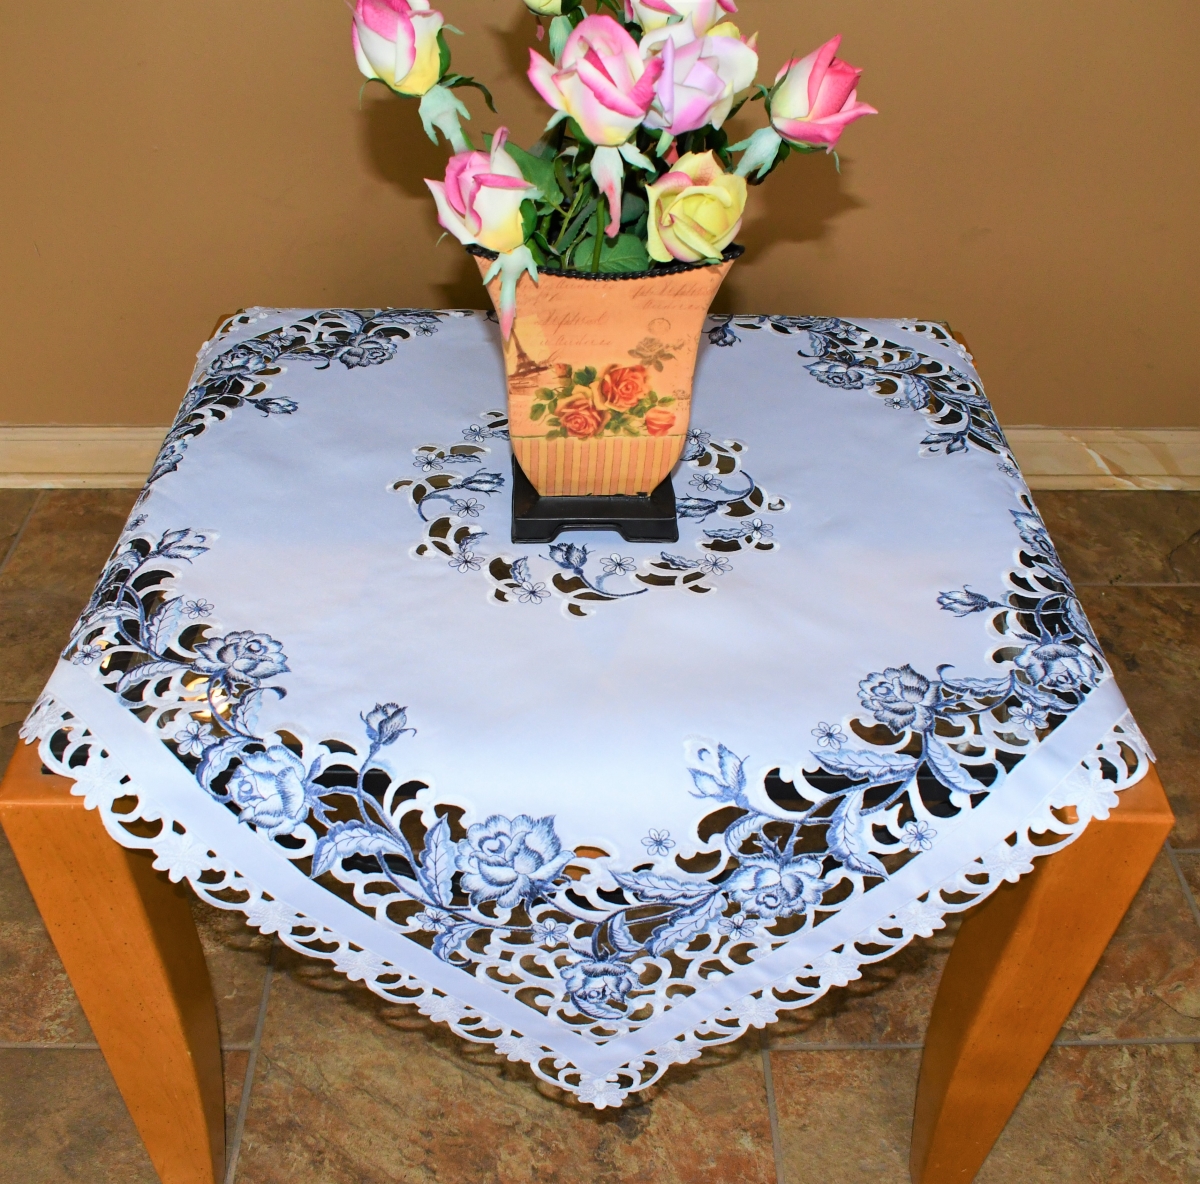 Picture of Sinobrite H8459-34x34SQ 34 x 34 in. Blue Rose on White Fabric Square Table Topper